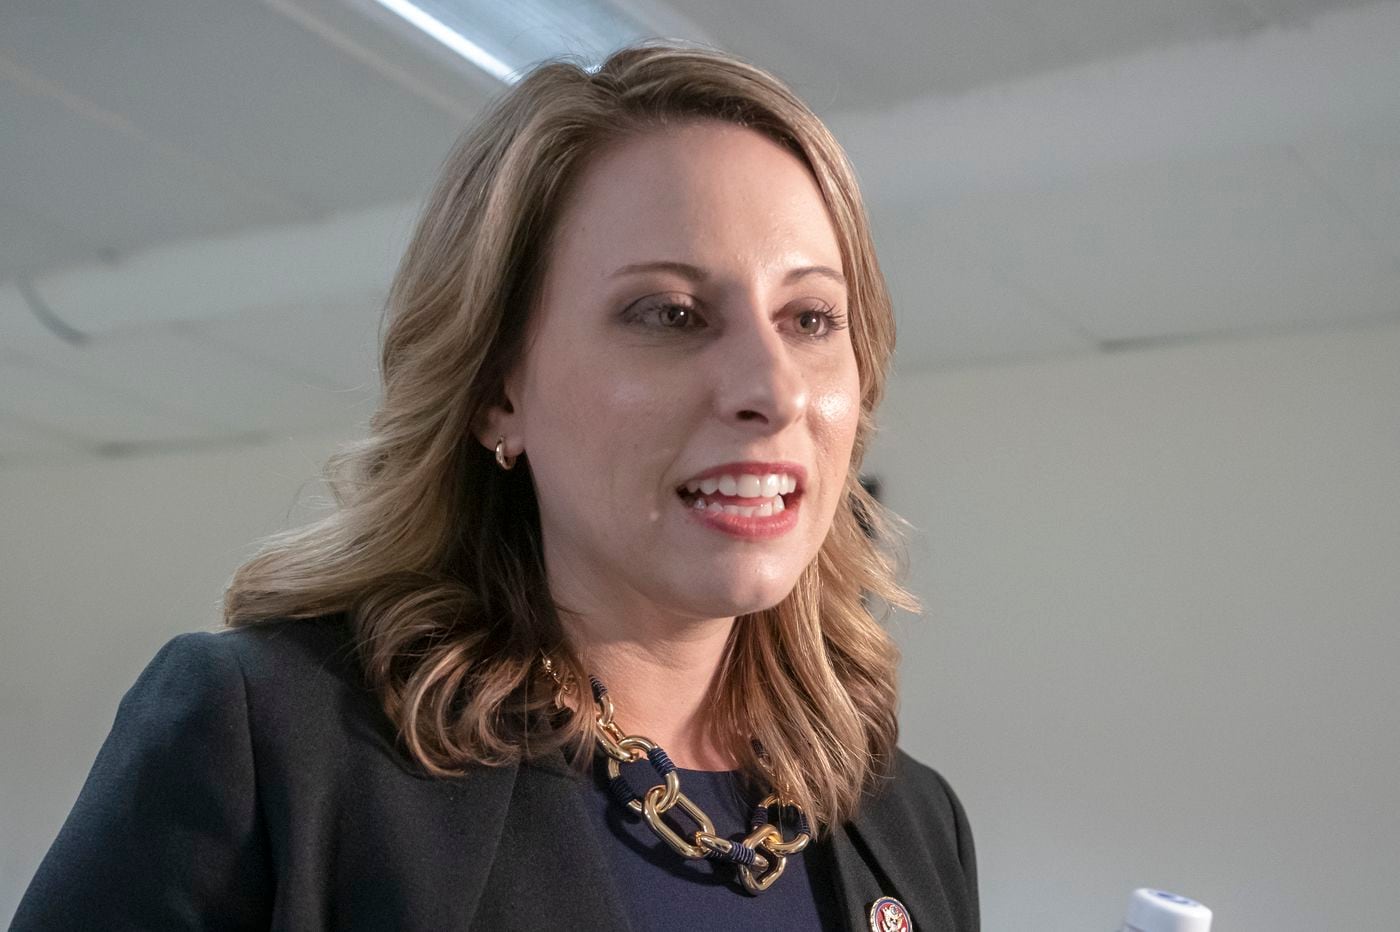 1400px x 932px - Rep. Katie Hill resigned because she behaved unethically ...